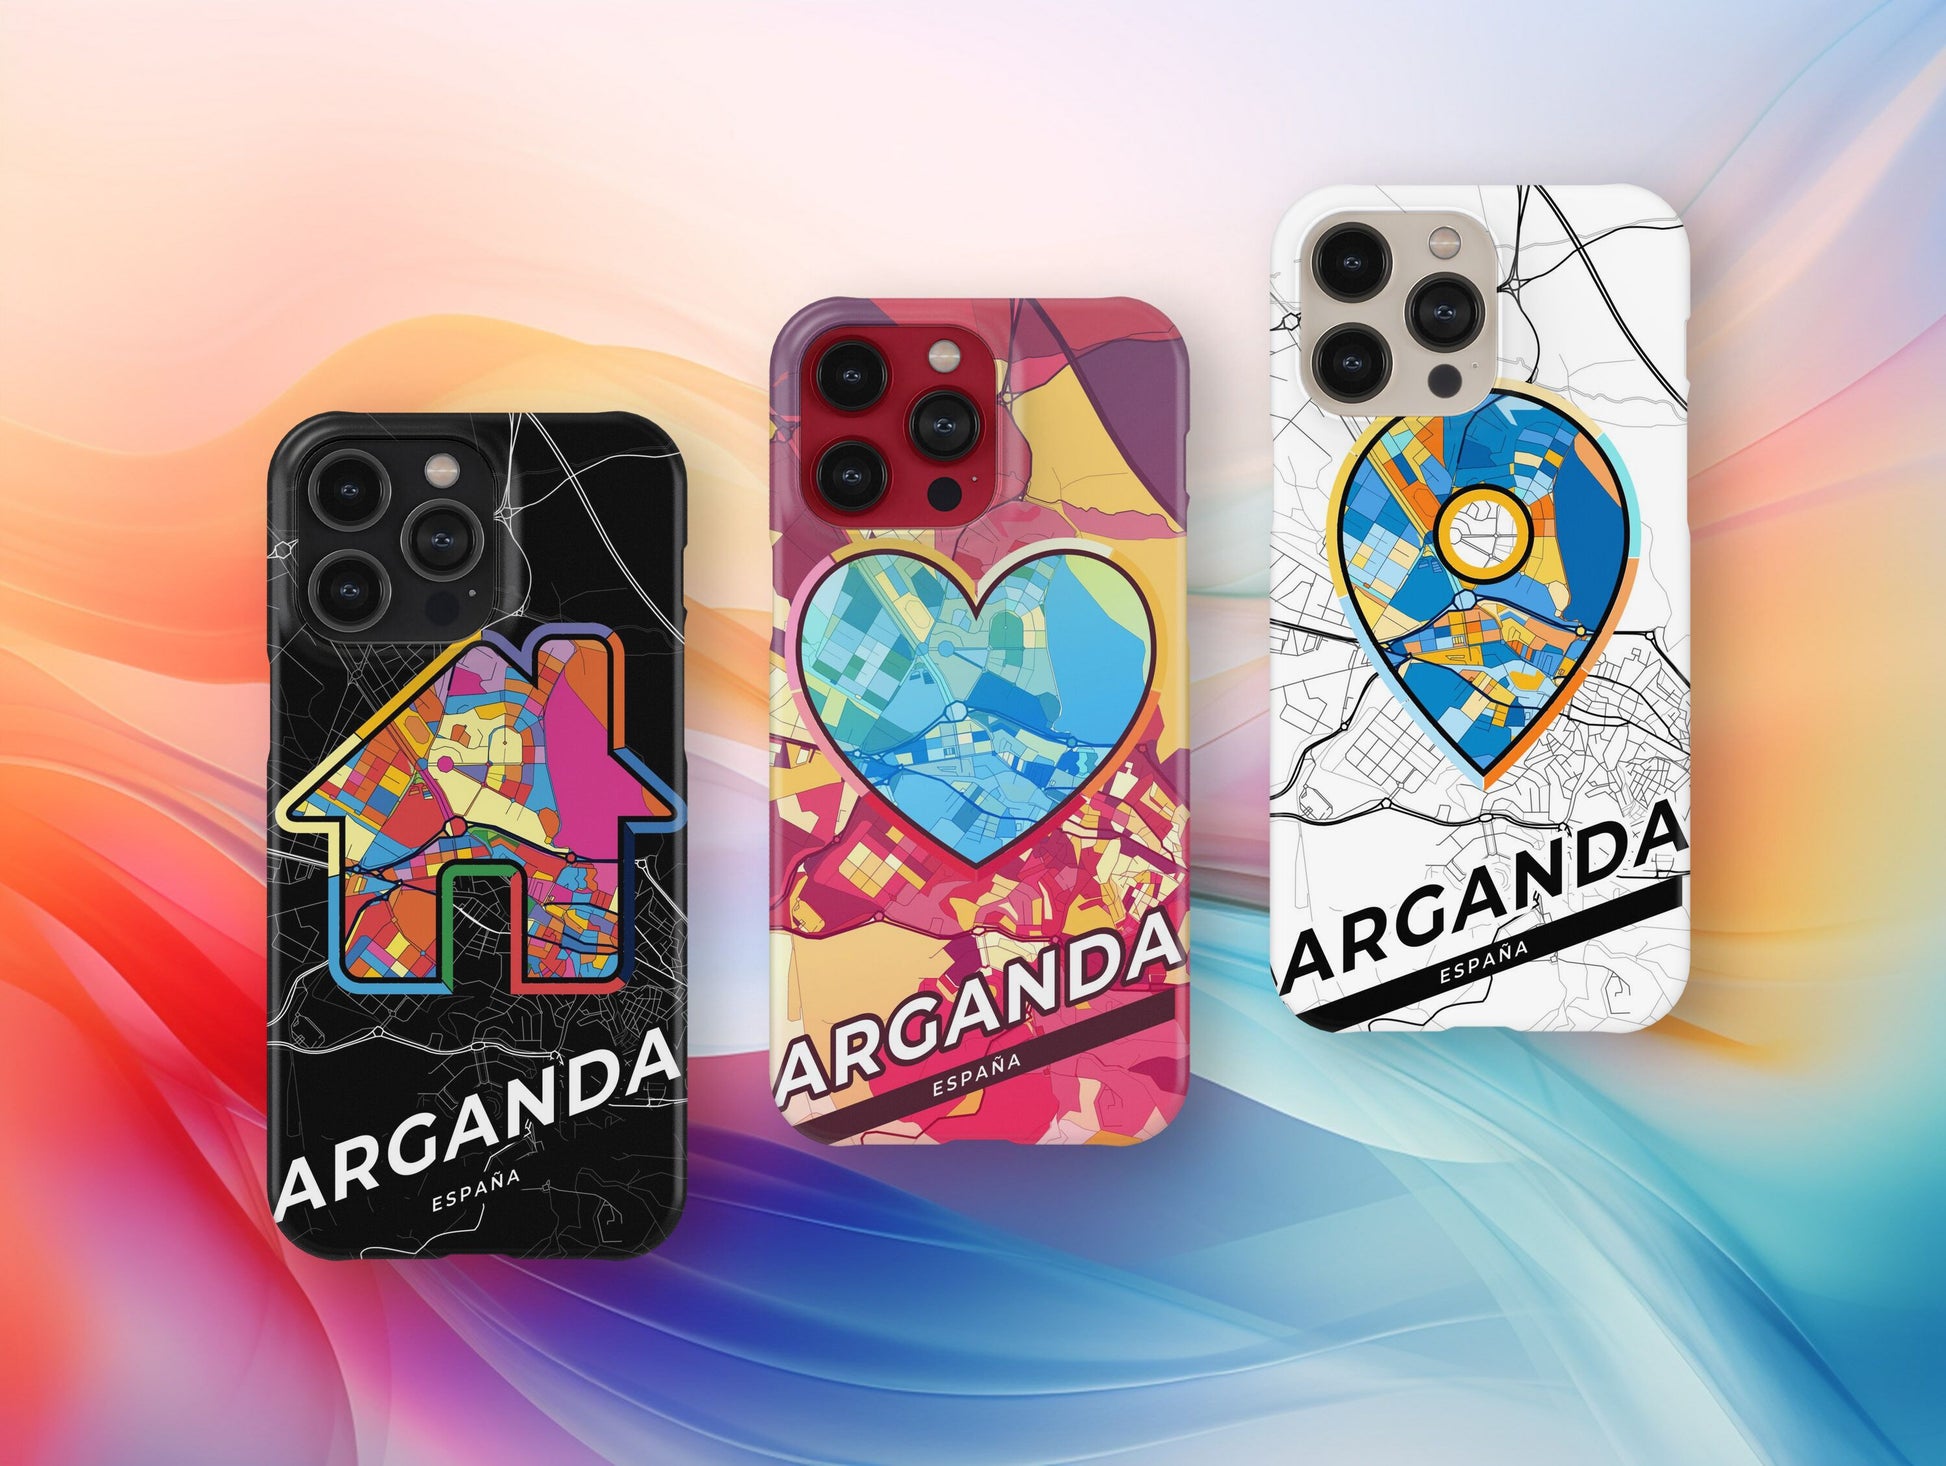 Arganda Spain slim phone case with colorful icon. Birthday, wedding or housewarming gift. Couple match cases.